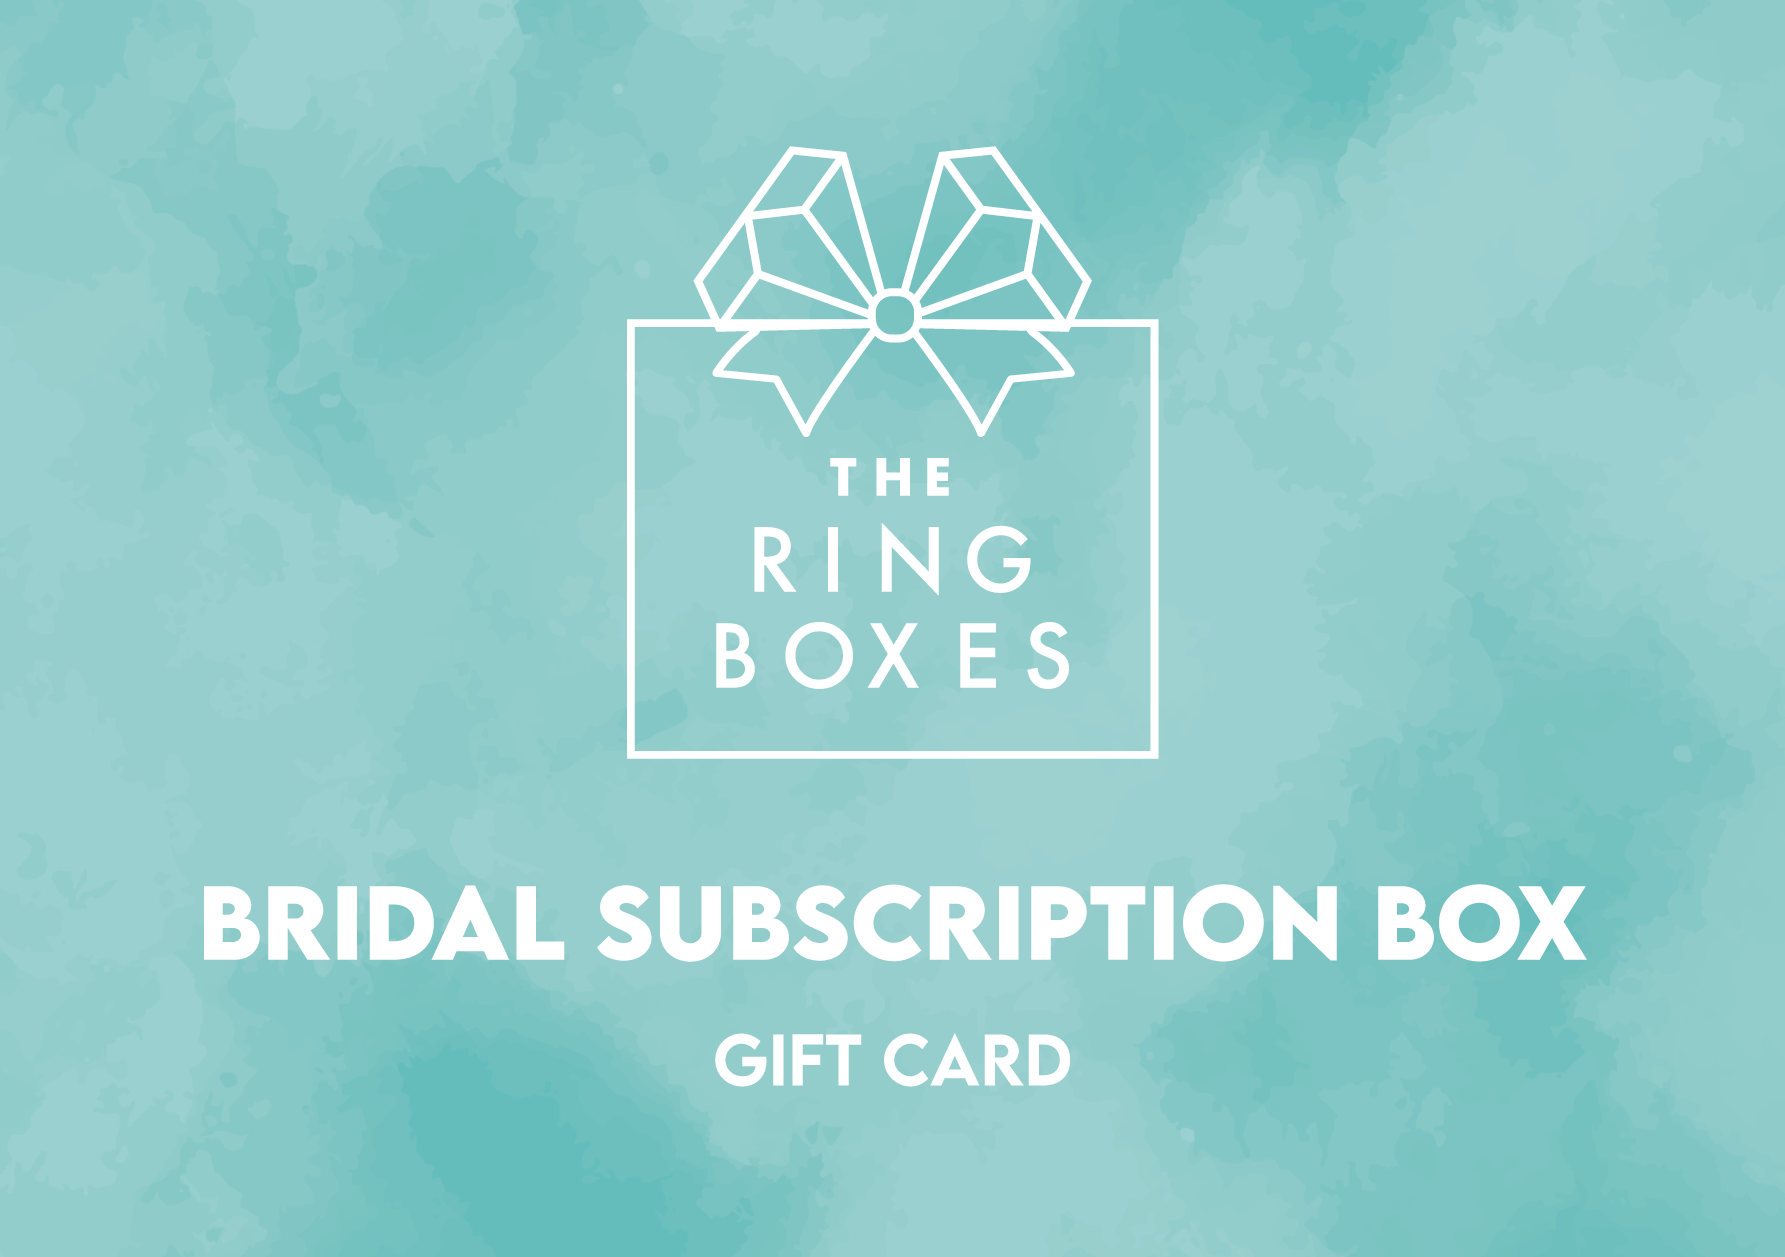 The Ring Boxes Gift Card